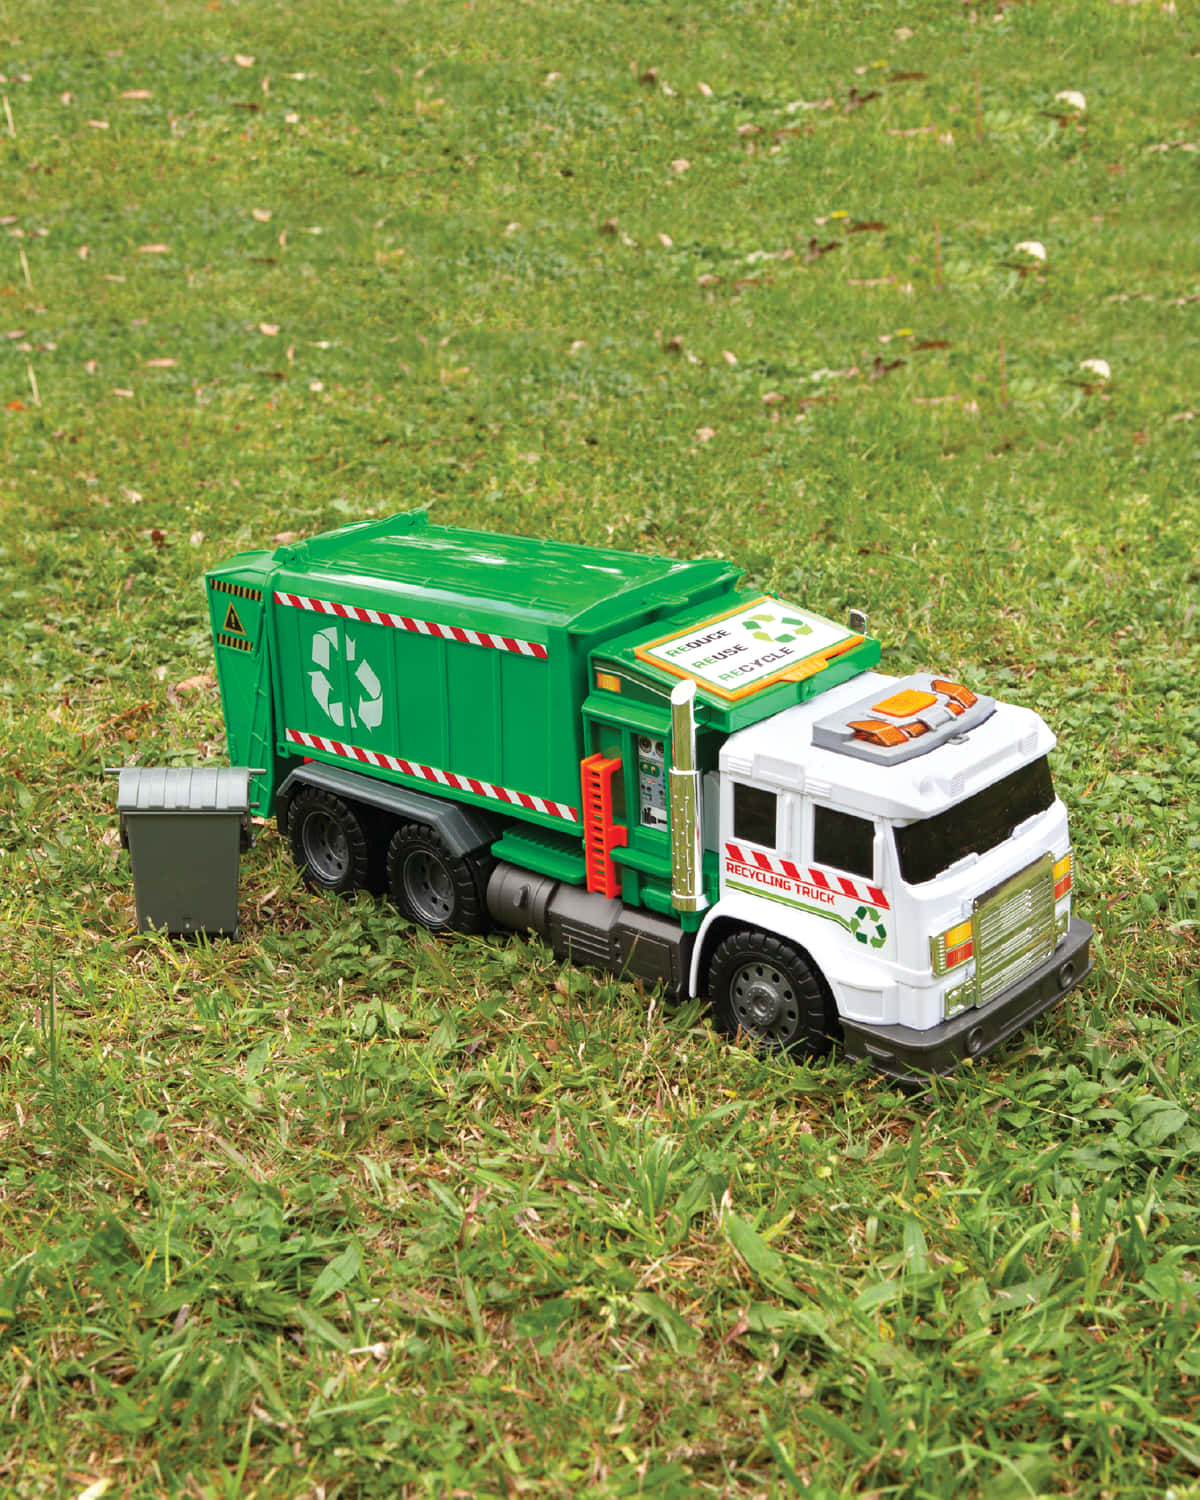 A Green Garbage Truck